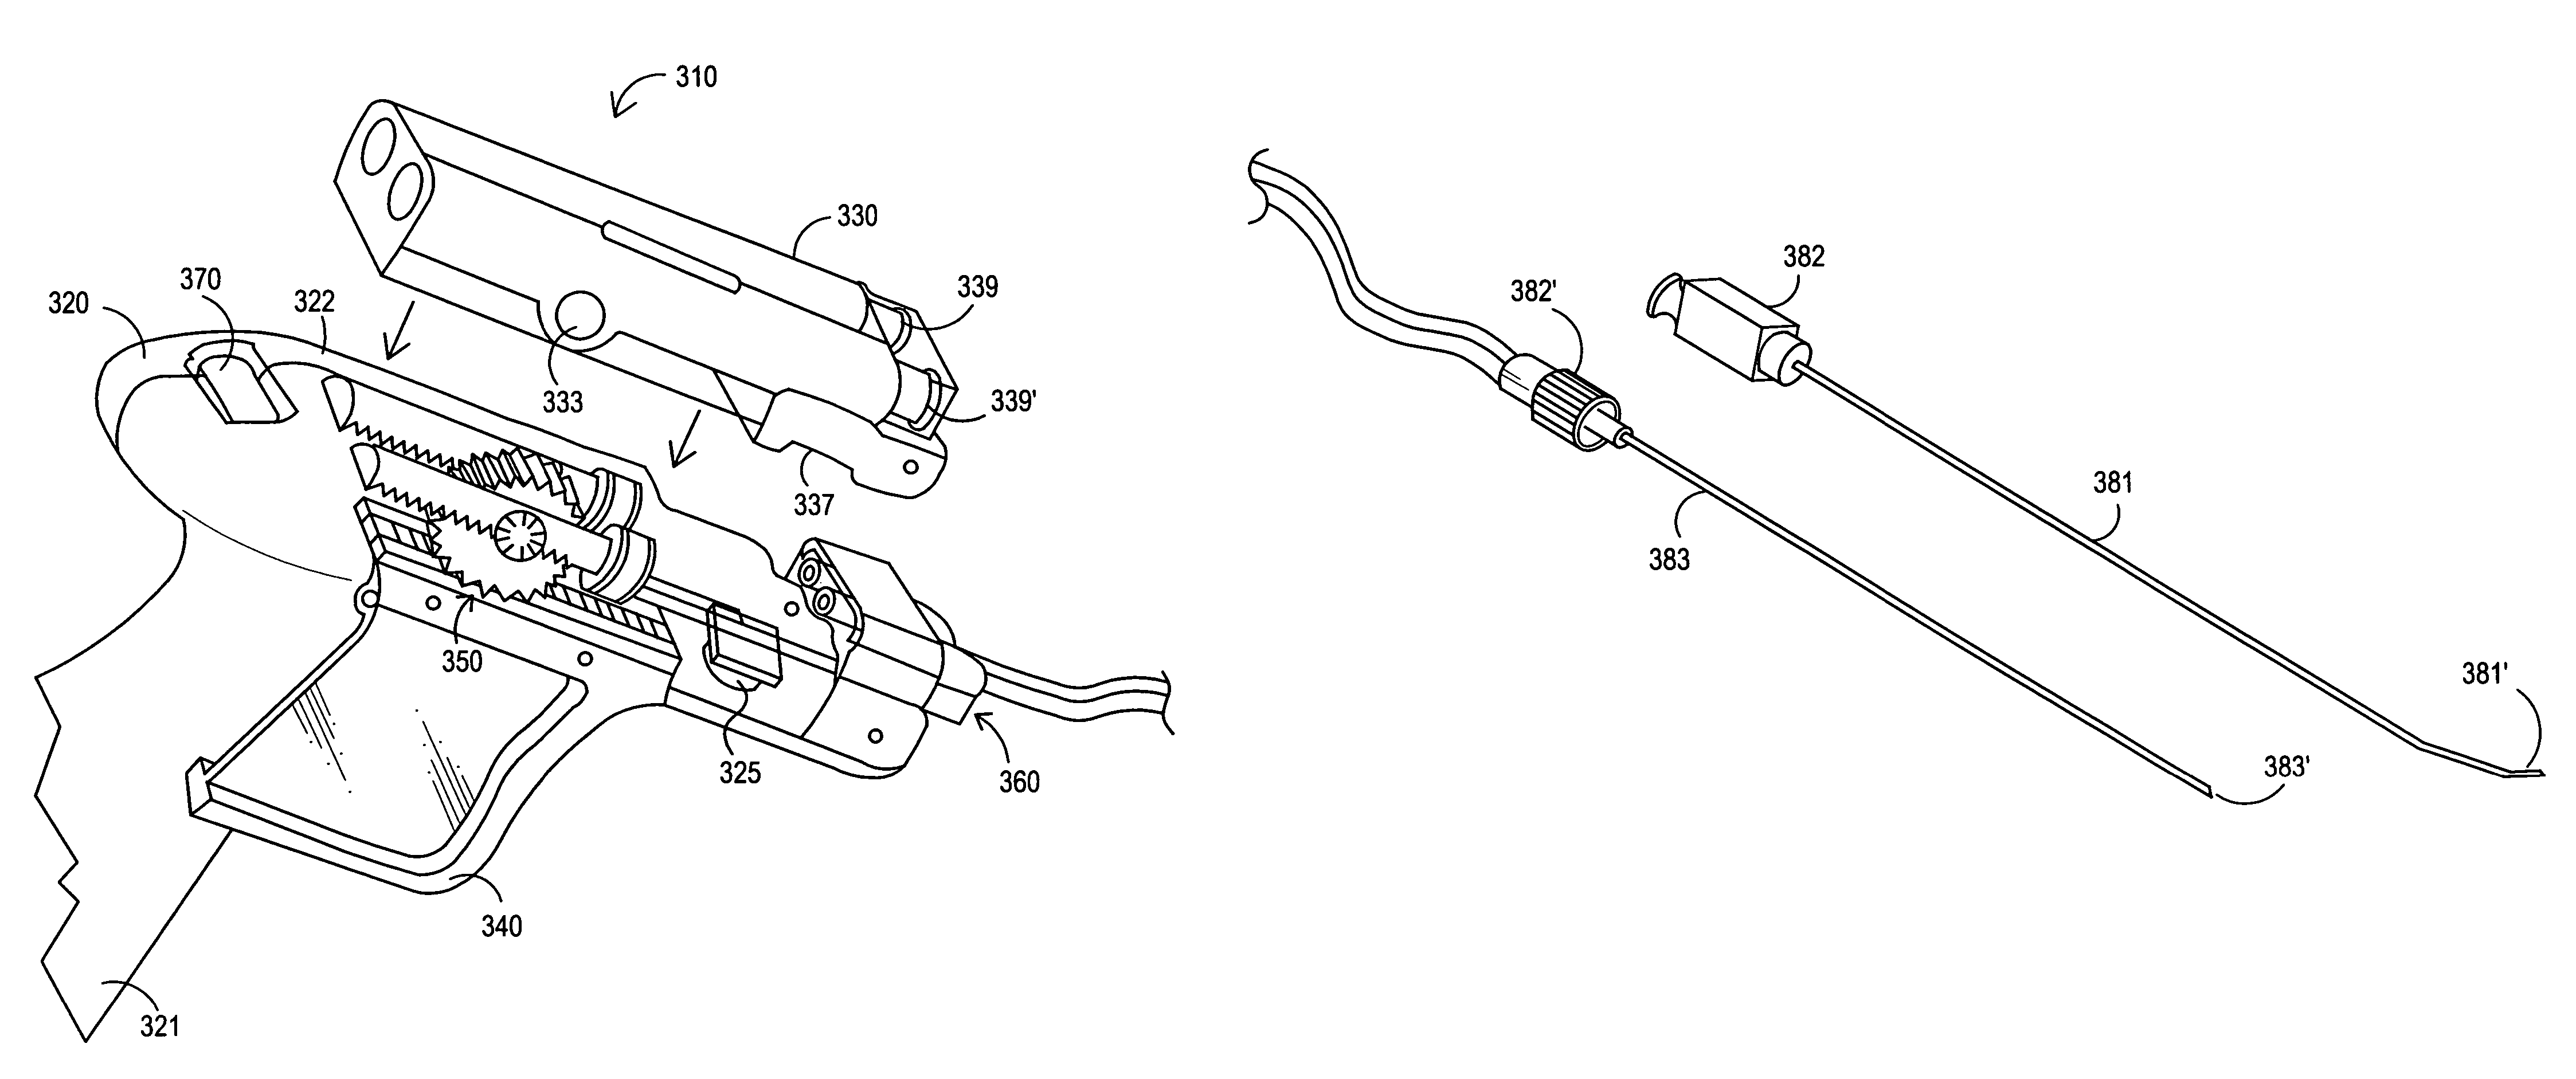 Apparatus and method for delivery of biologic sealant